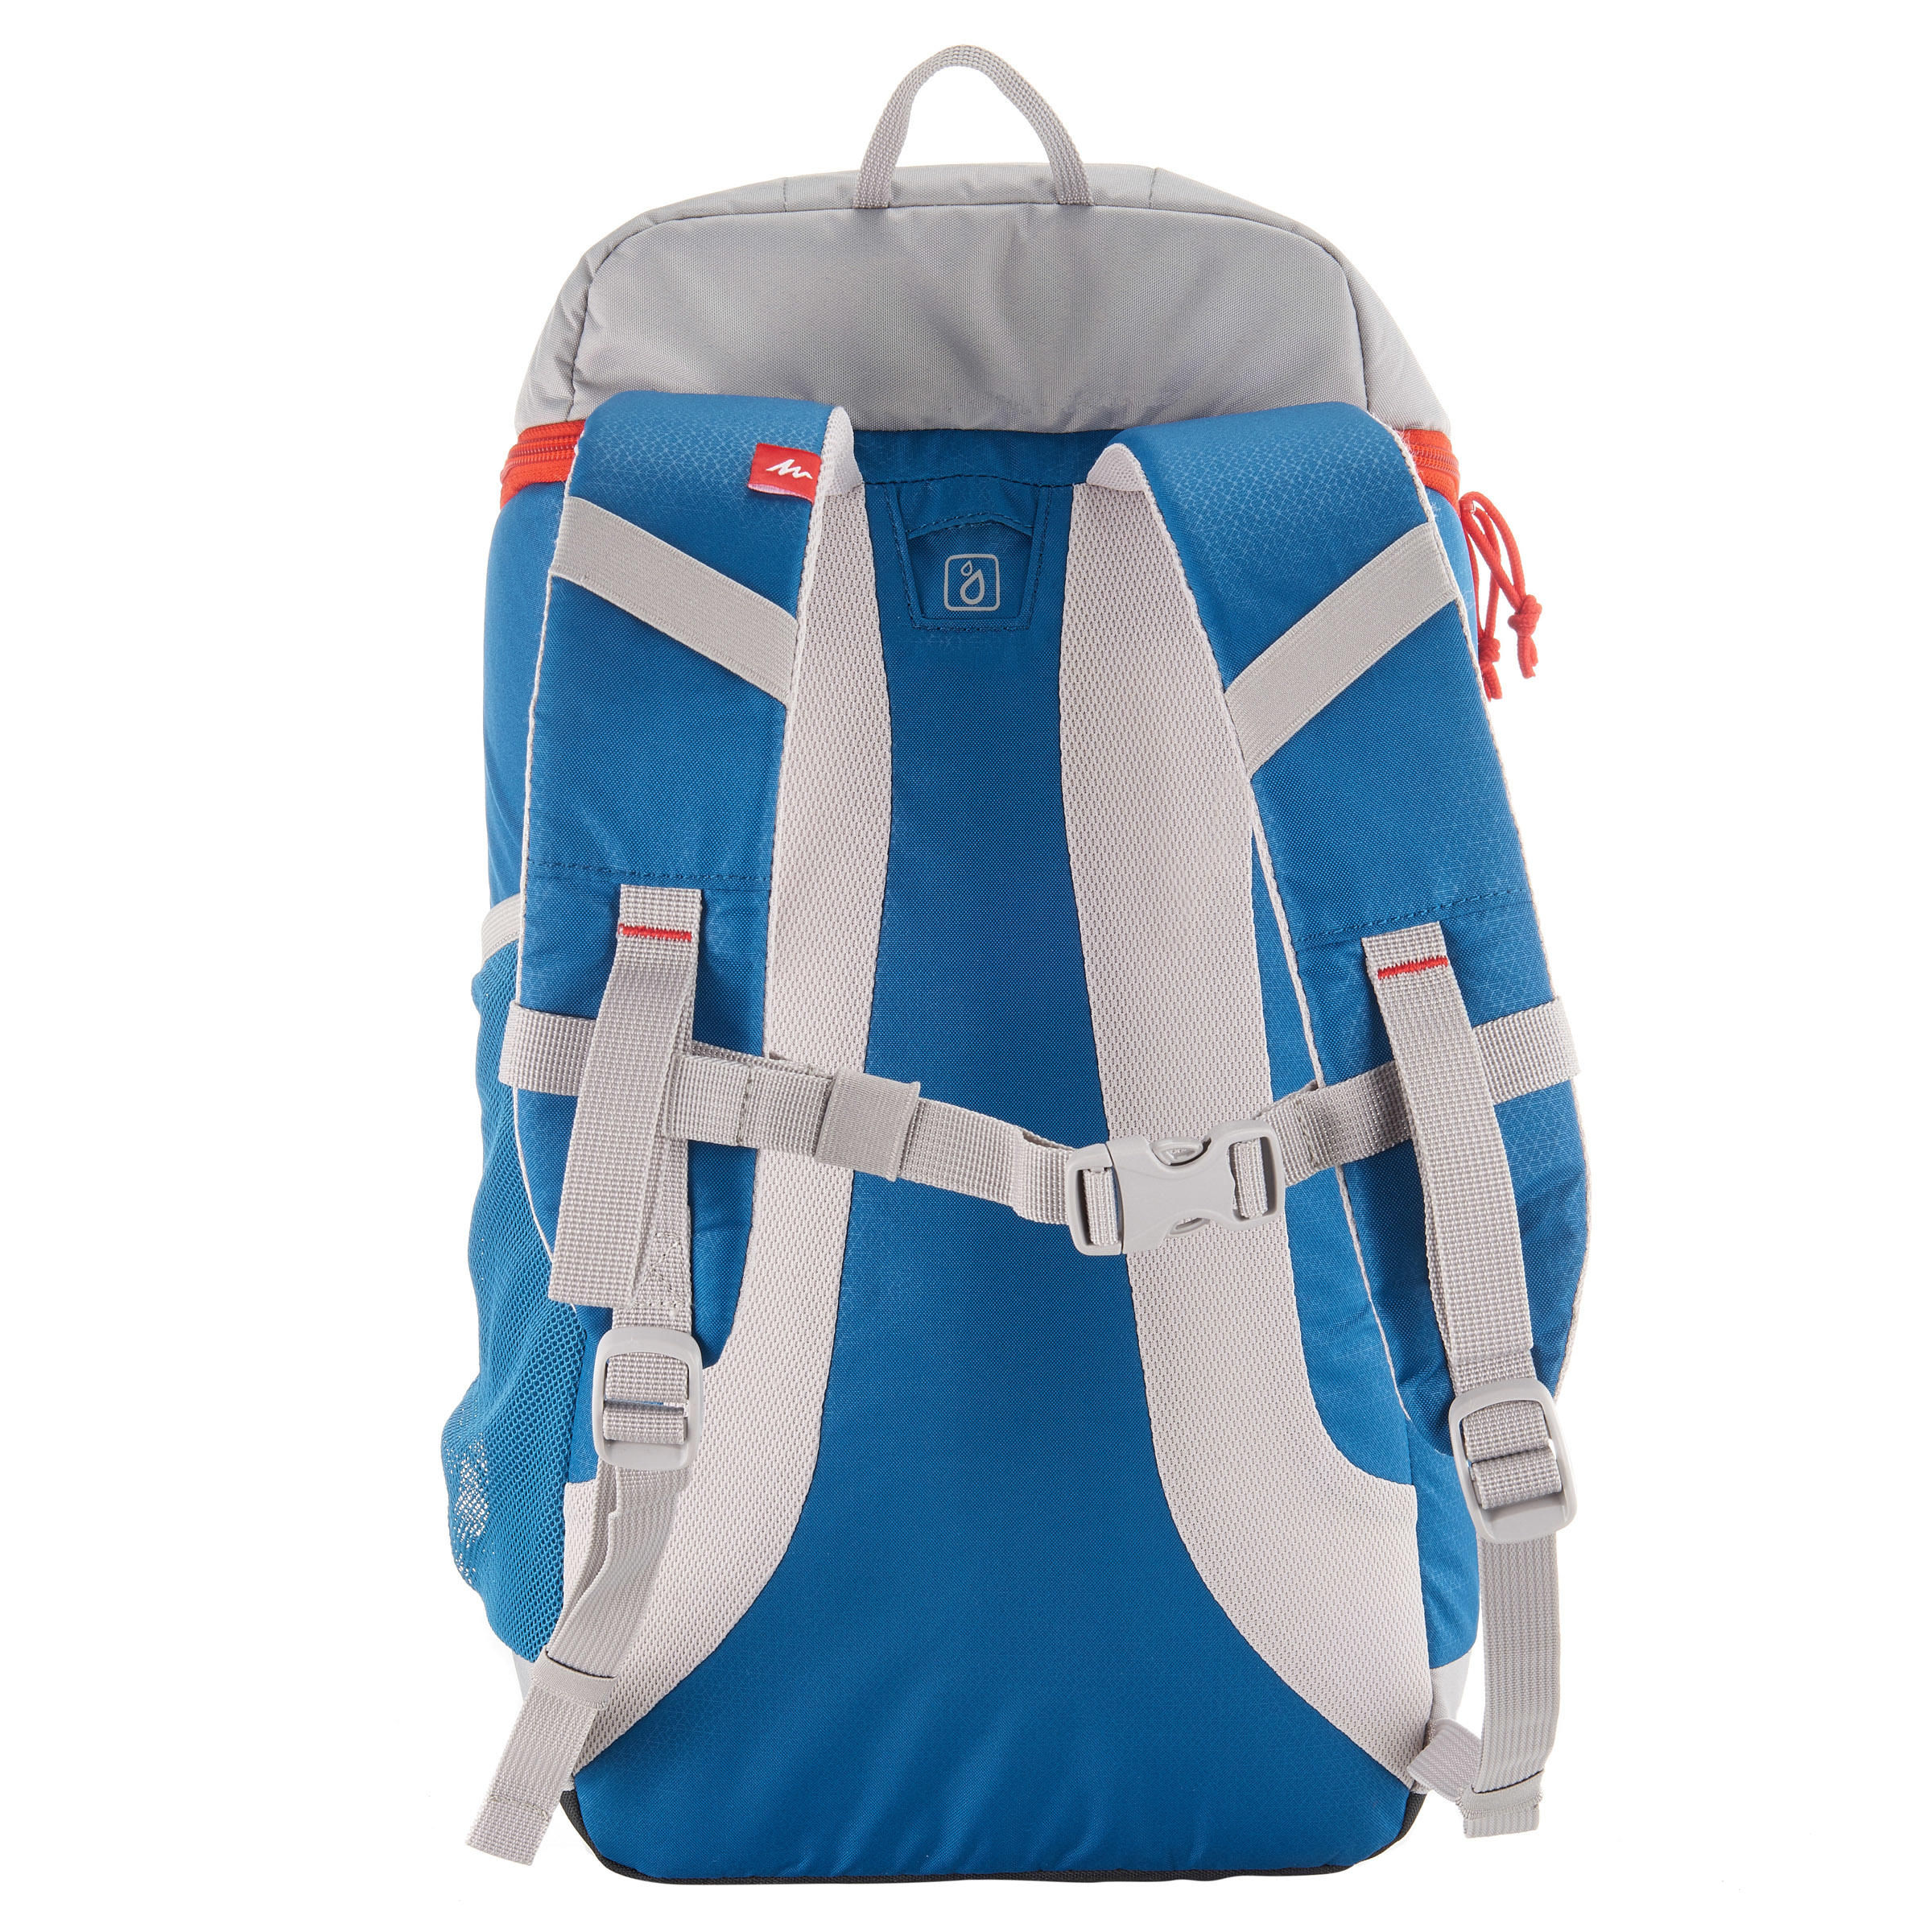 ISOTHERMAL BACKPACK FOR CAMPING AND 